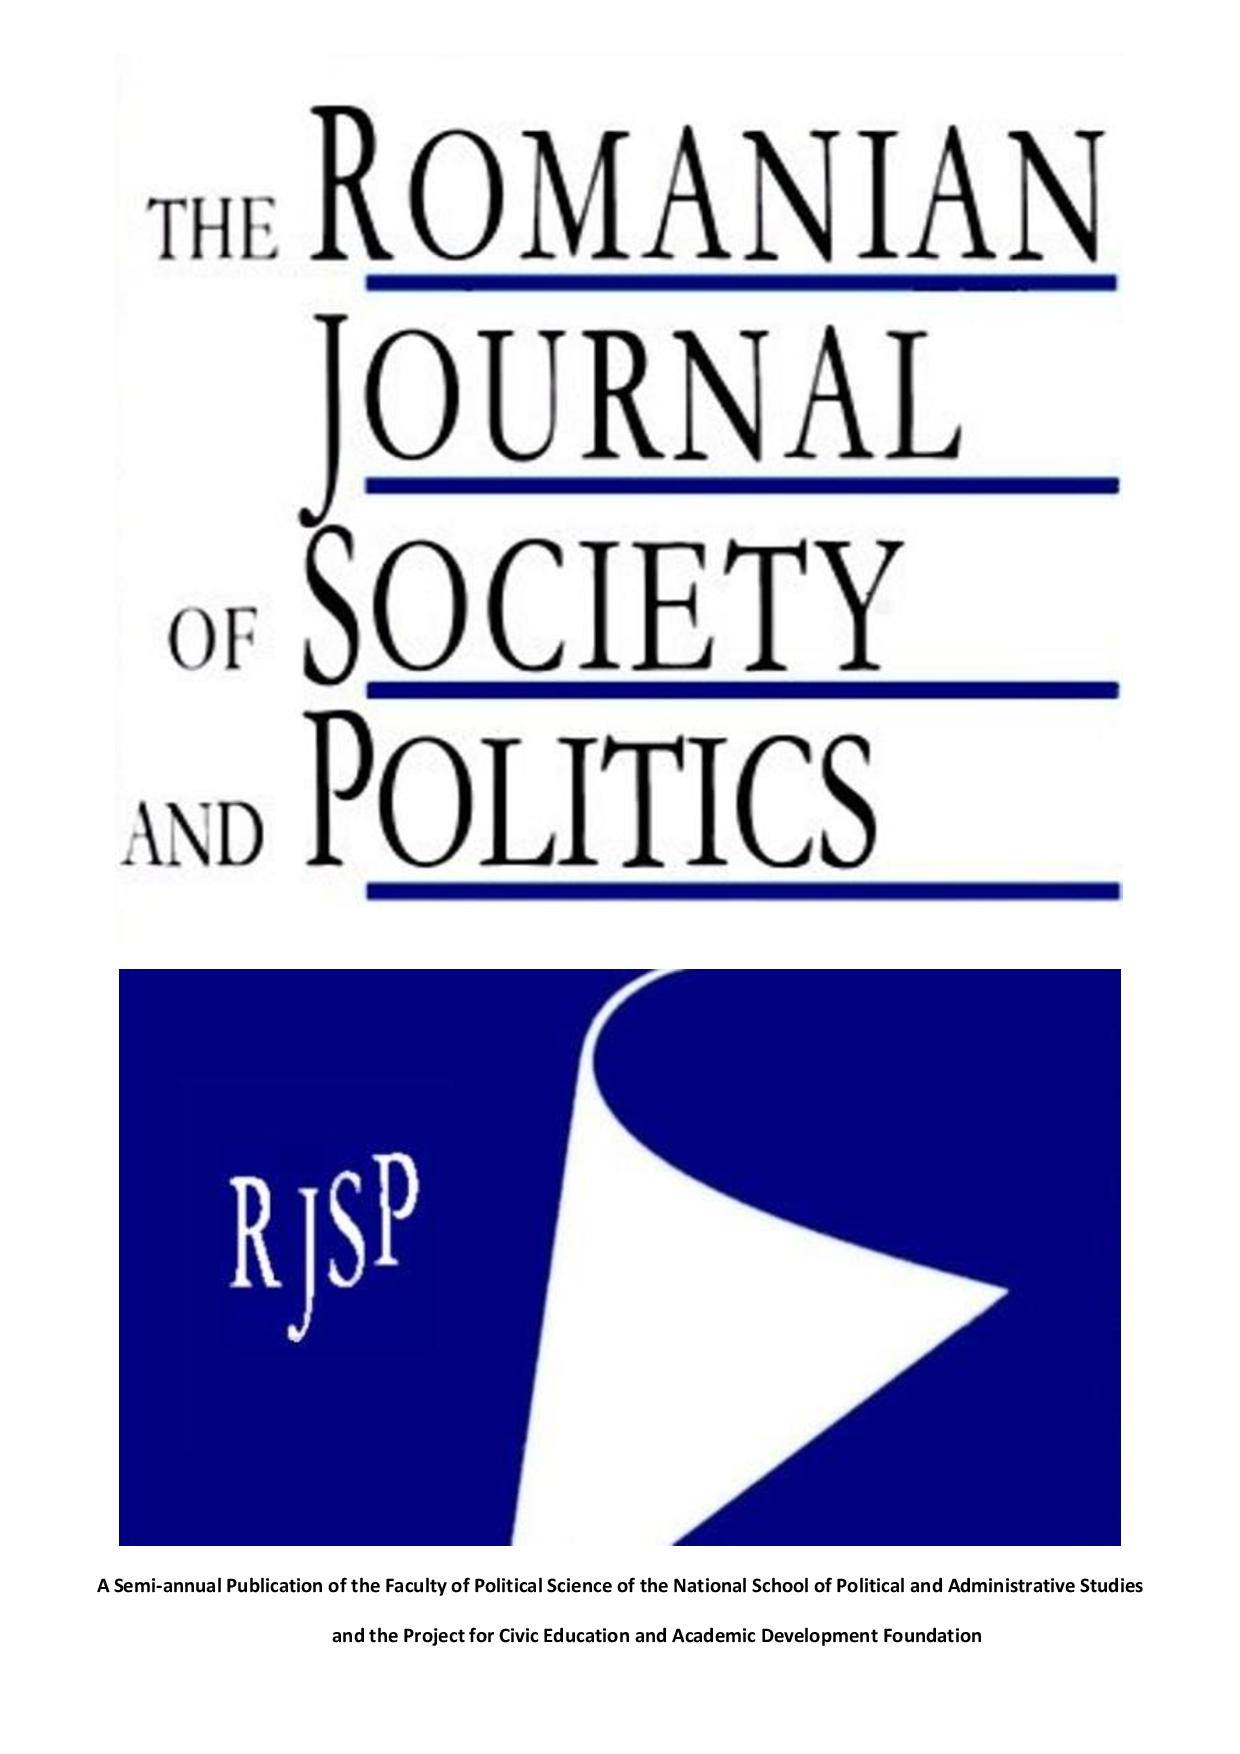 Editors’ Note Cover Image